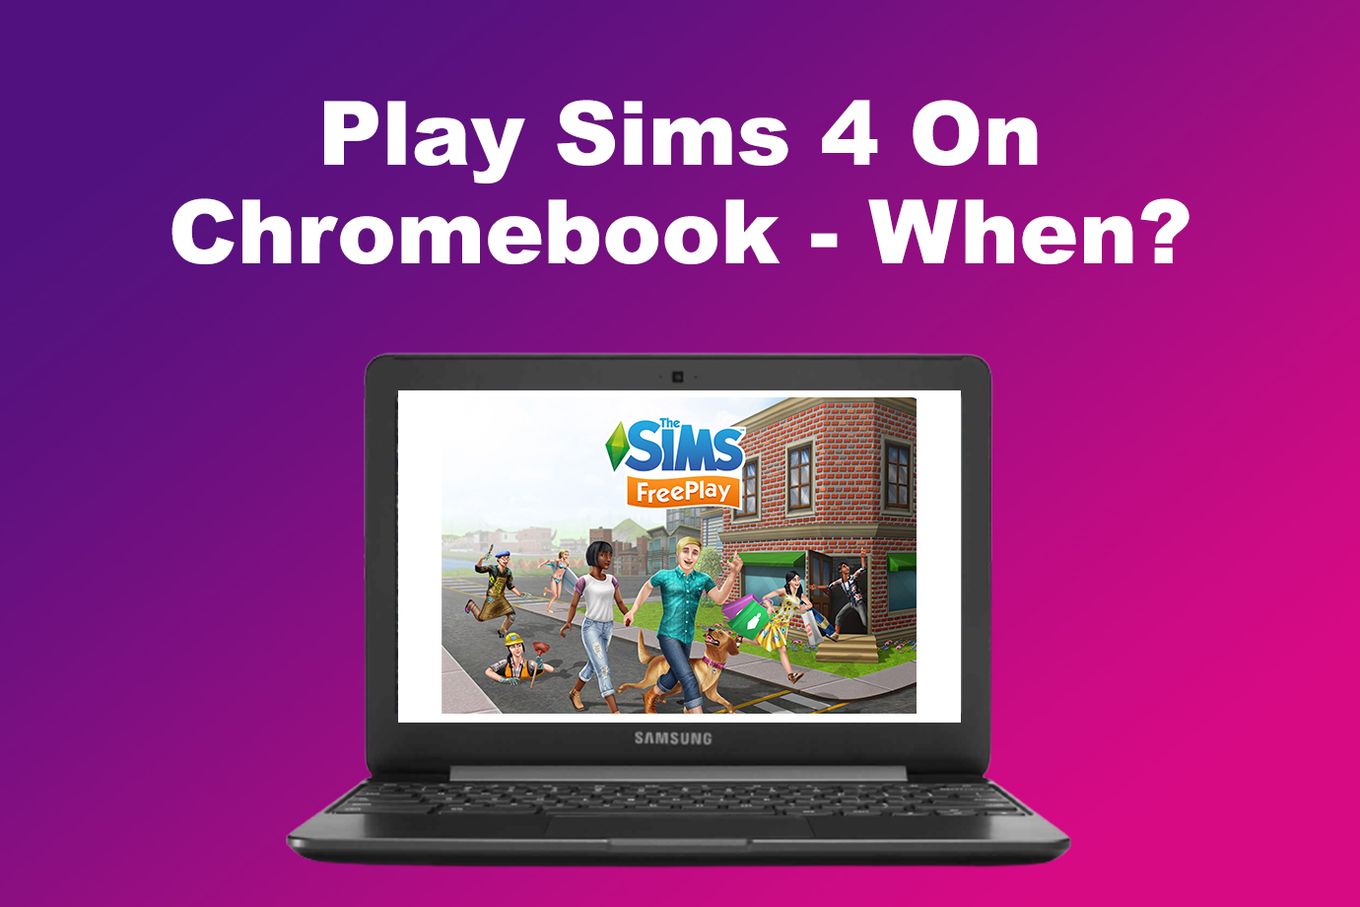 Play Sims 4 on Chromebook - When?